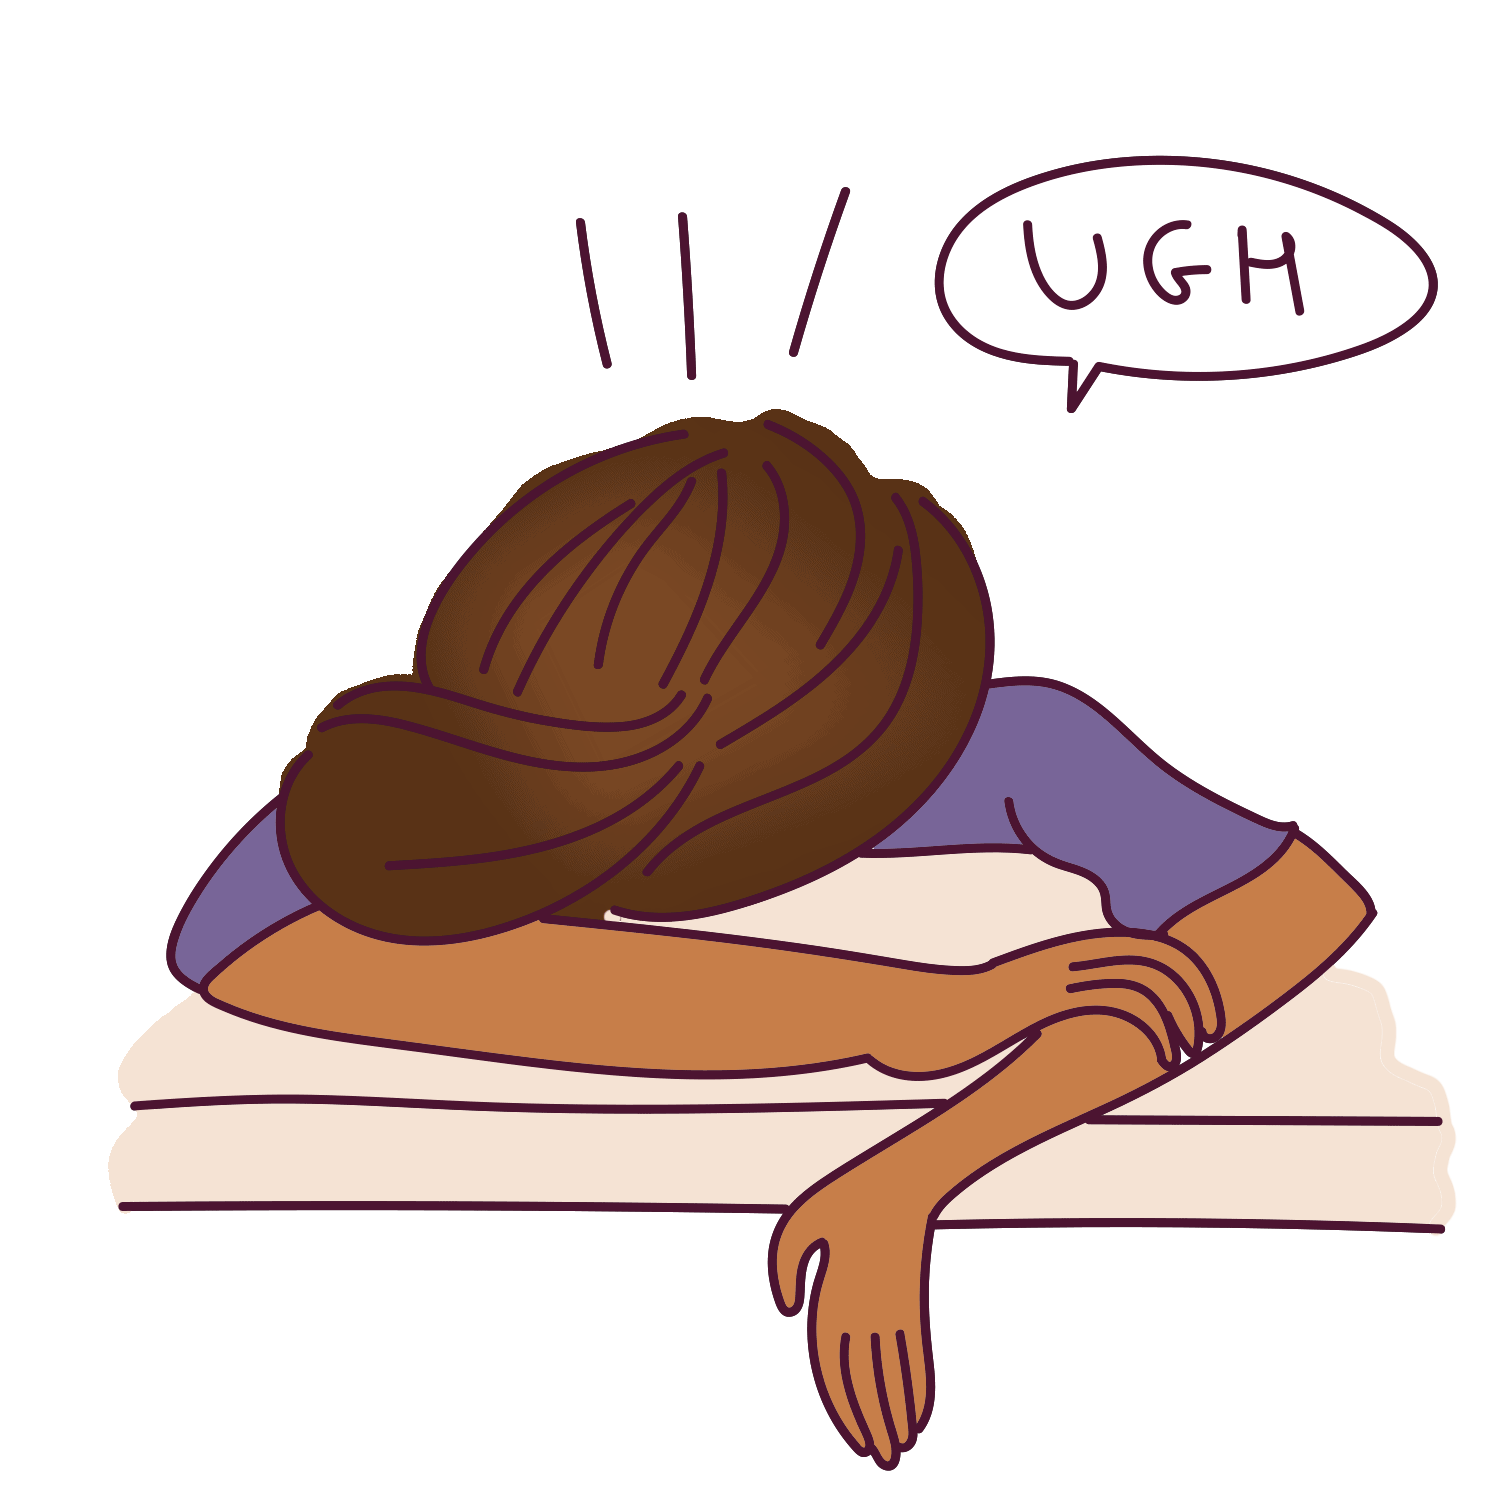 It's very difficult to actually write a blog post from scratch. But don't fret because I'm going to teach you how to craft a viral blog post. Girl slumped on desk illustration.